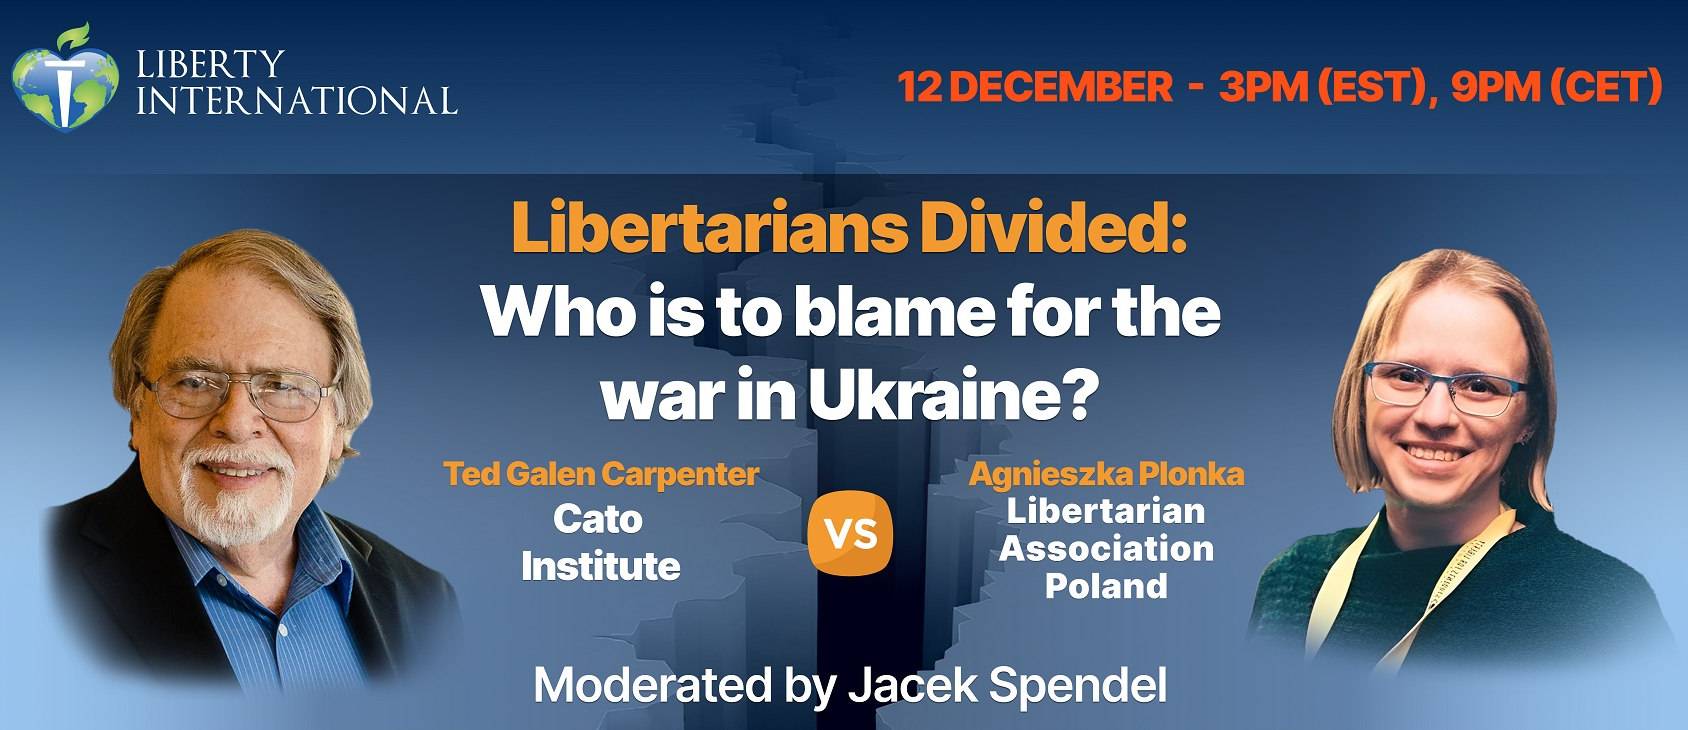 [LIVE DEBATE] Libertarians Divided: Who is to blame for the war in Ukraine?